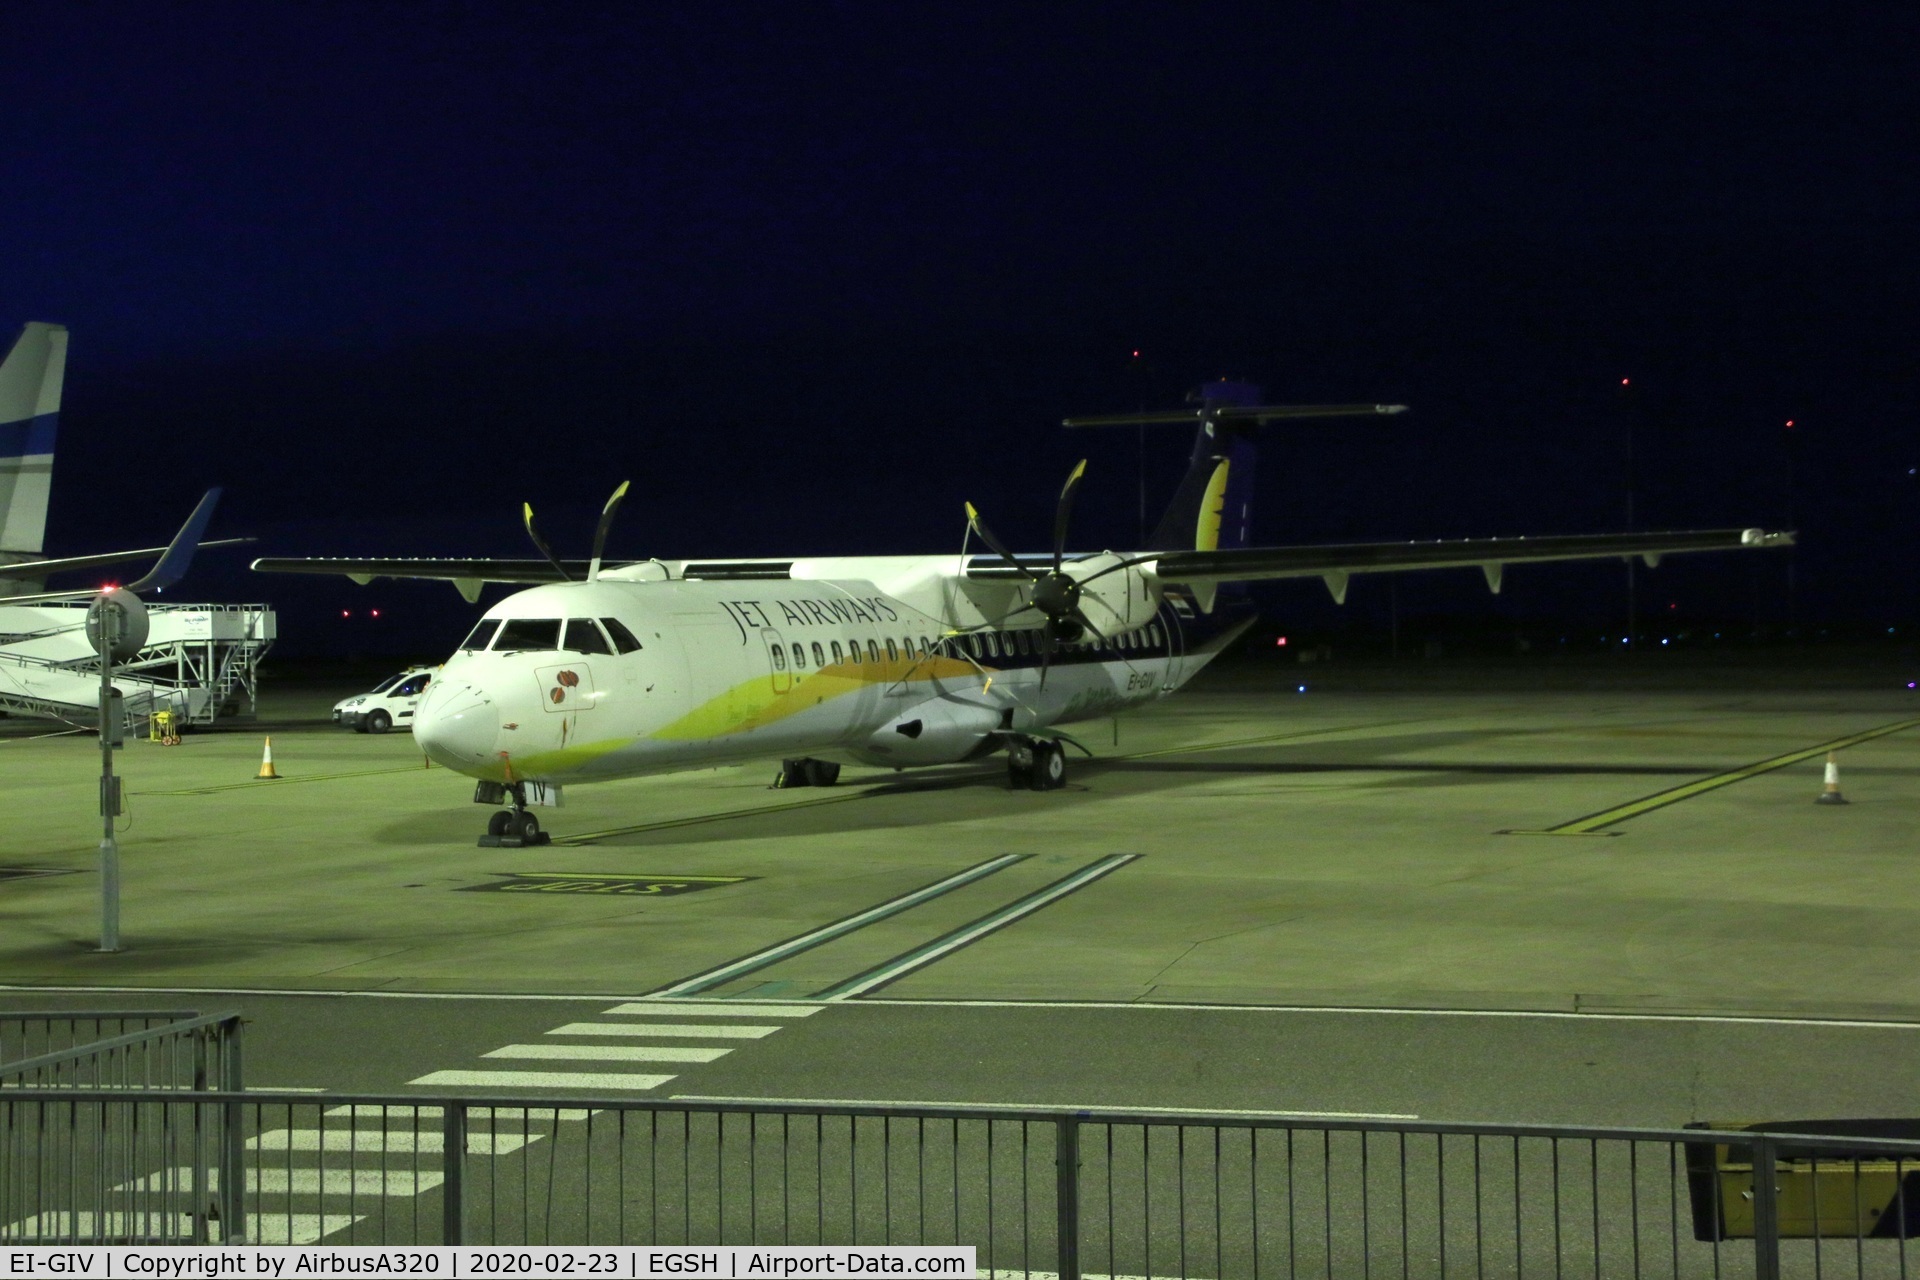 EI-GIV, 2012 ATR 72-600 (72-212A) C/N 1056, seen parked on stand after arriving at Norwich earlier this afternoon